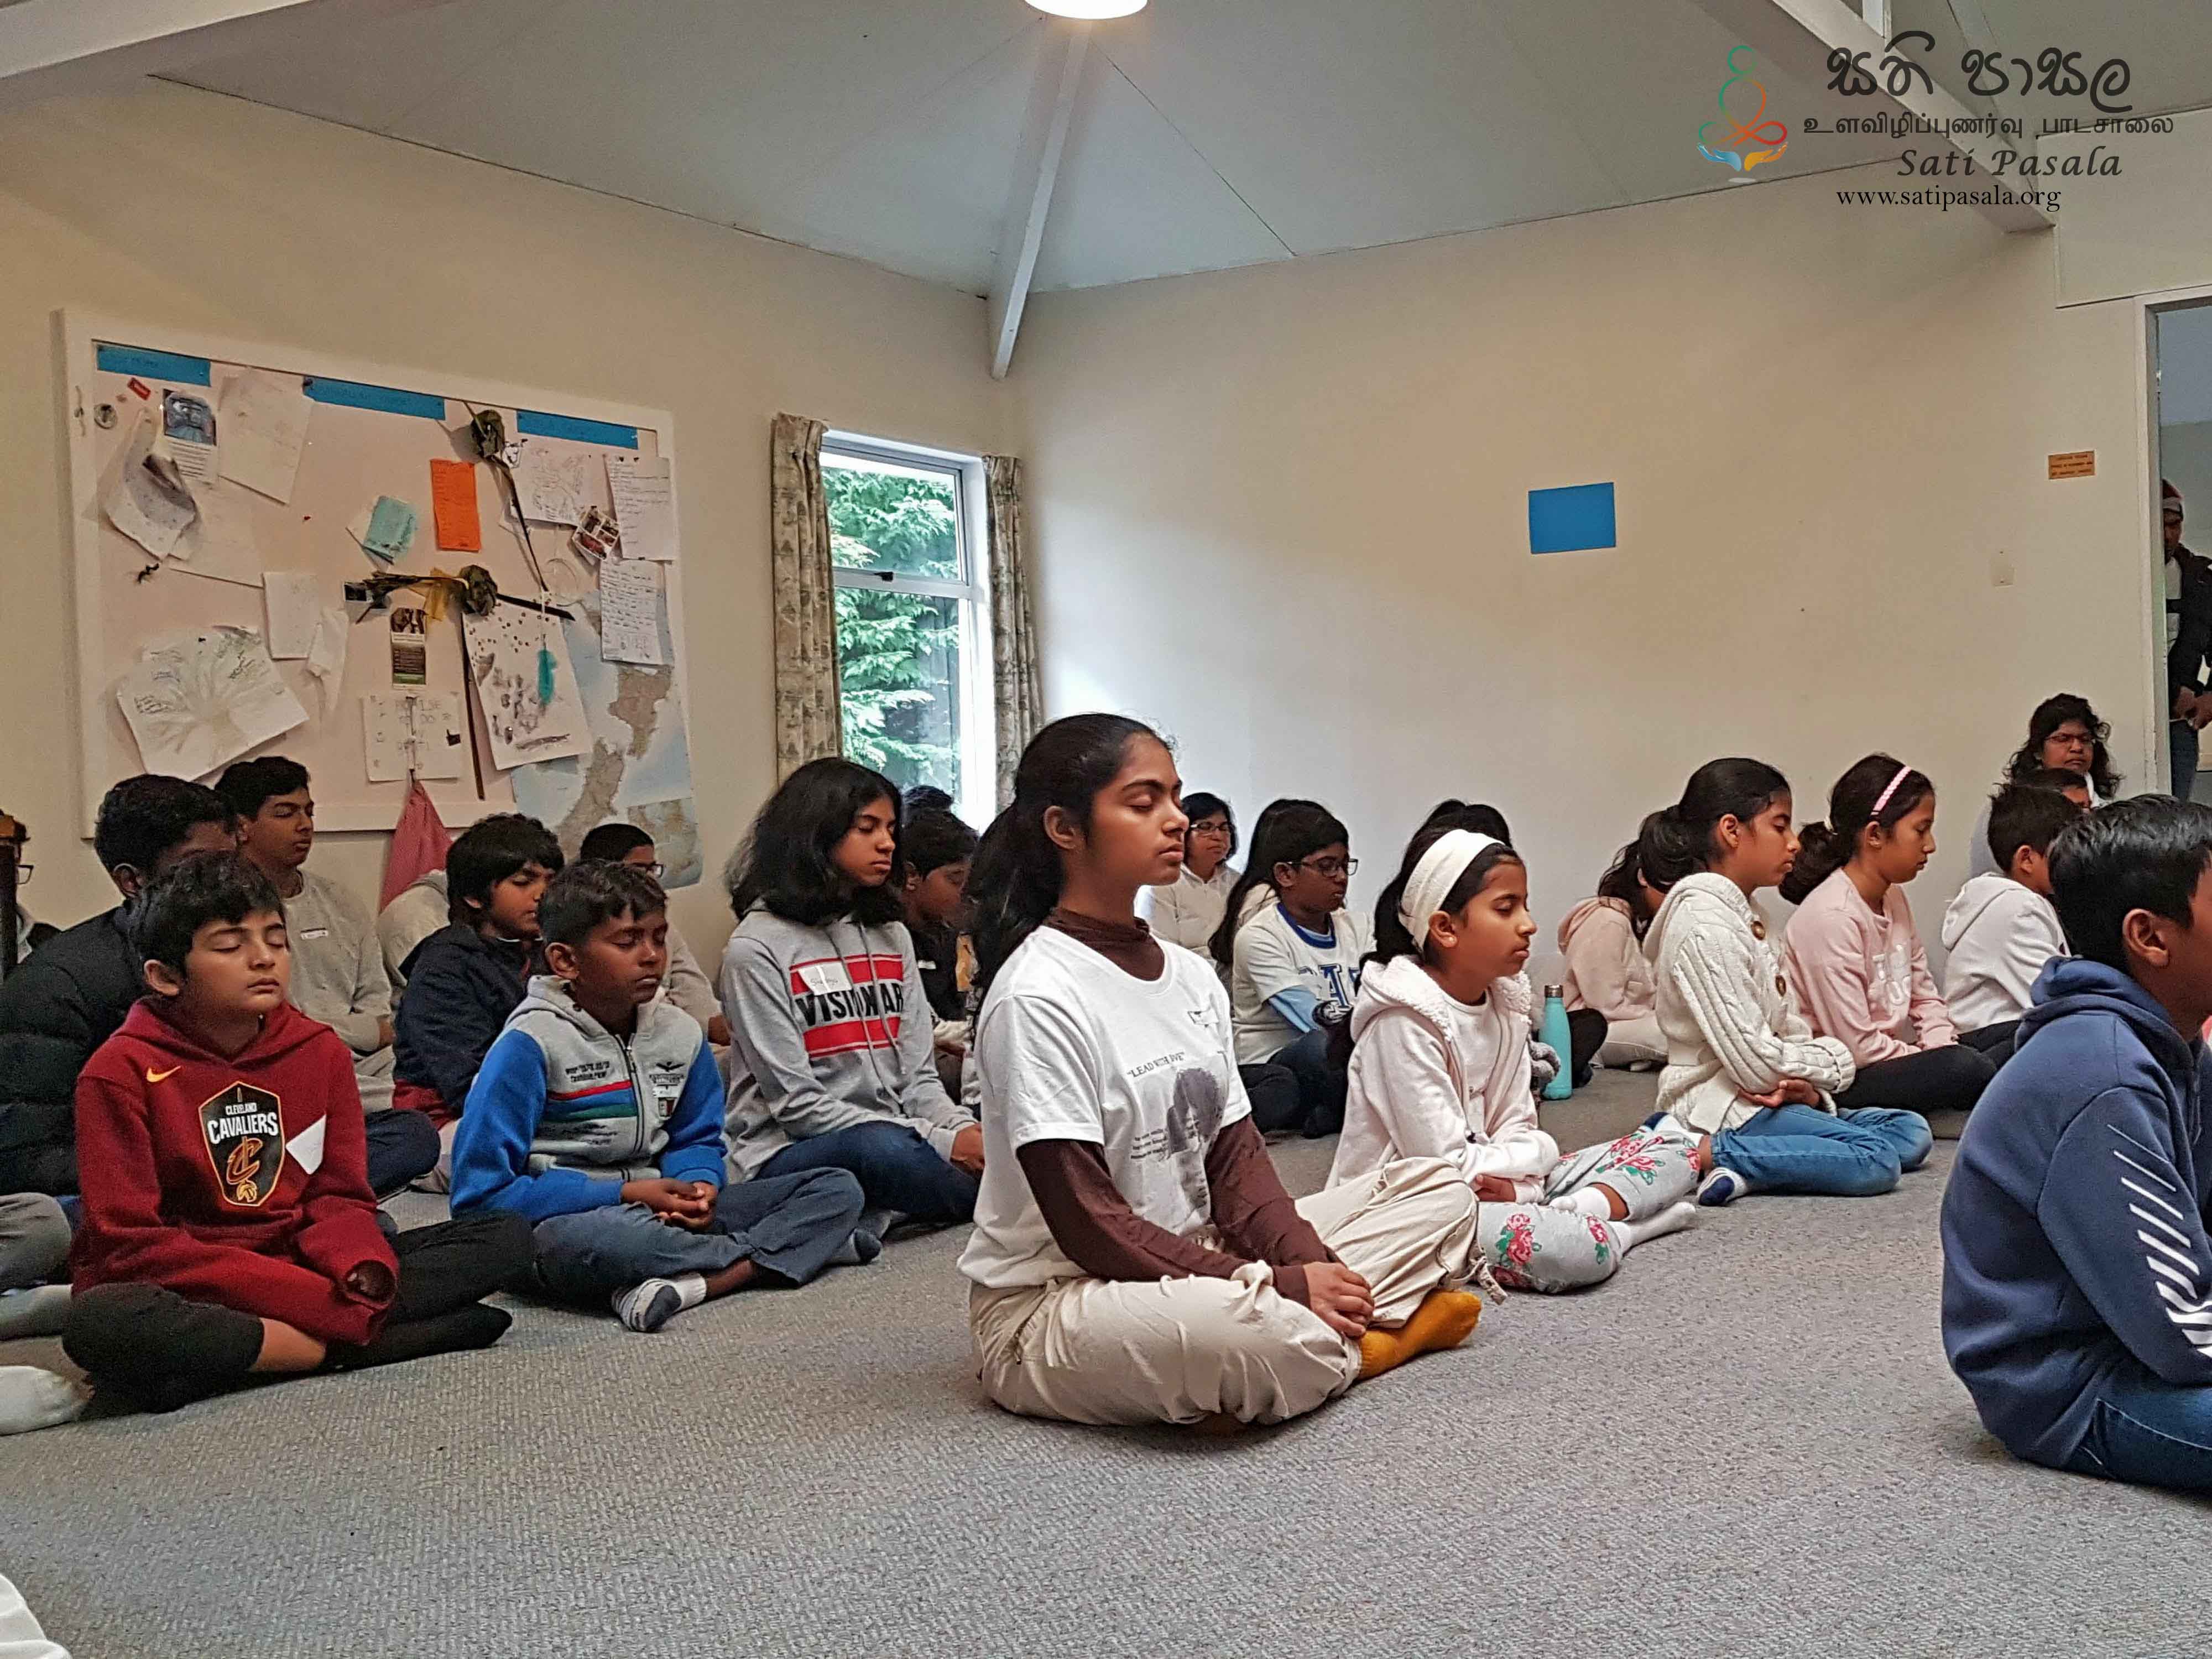 Workshop on Mindfulness at Huntleigh Guide Centre in Crofton Downs, Wellington, New Zealand